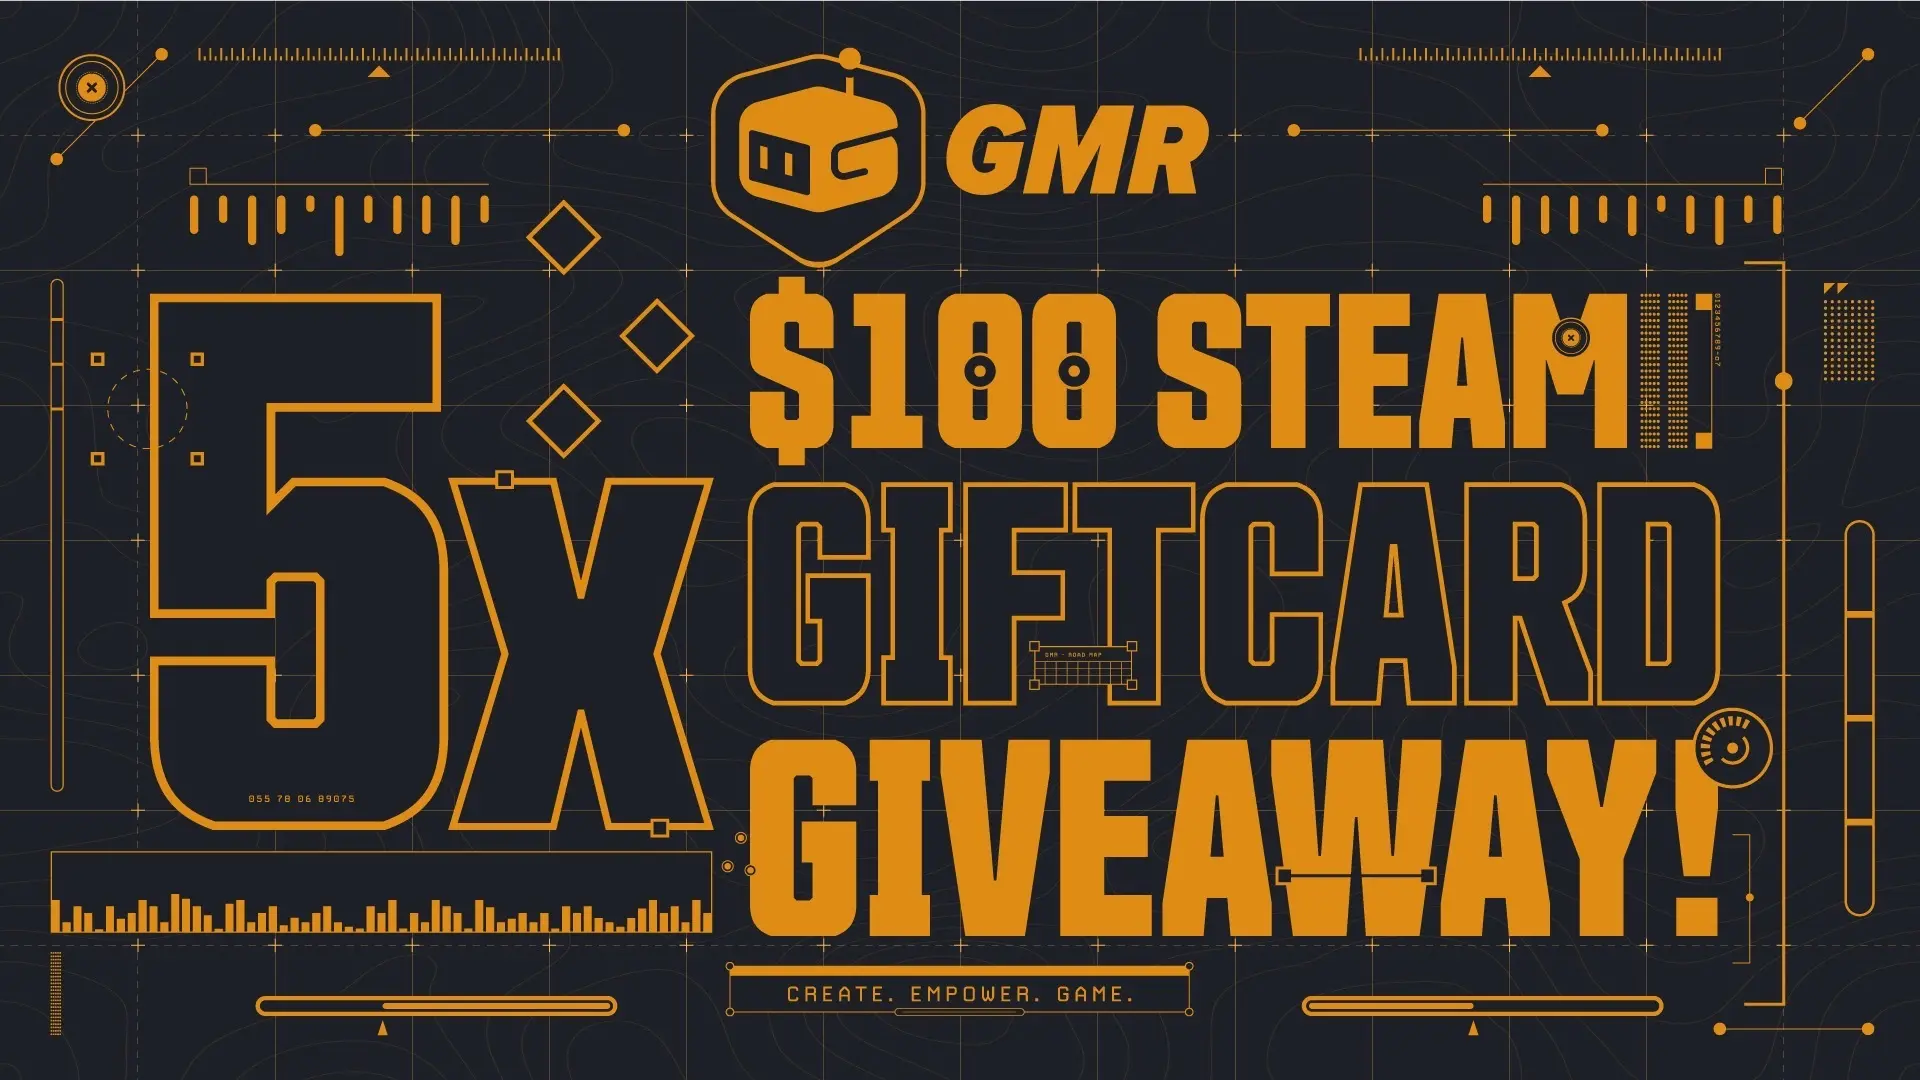 5x $100 Steam Gift Card Giveaway